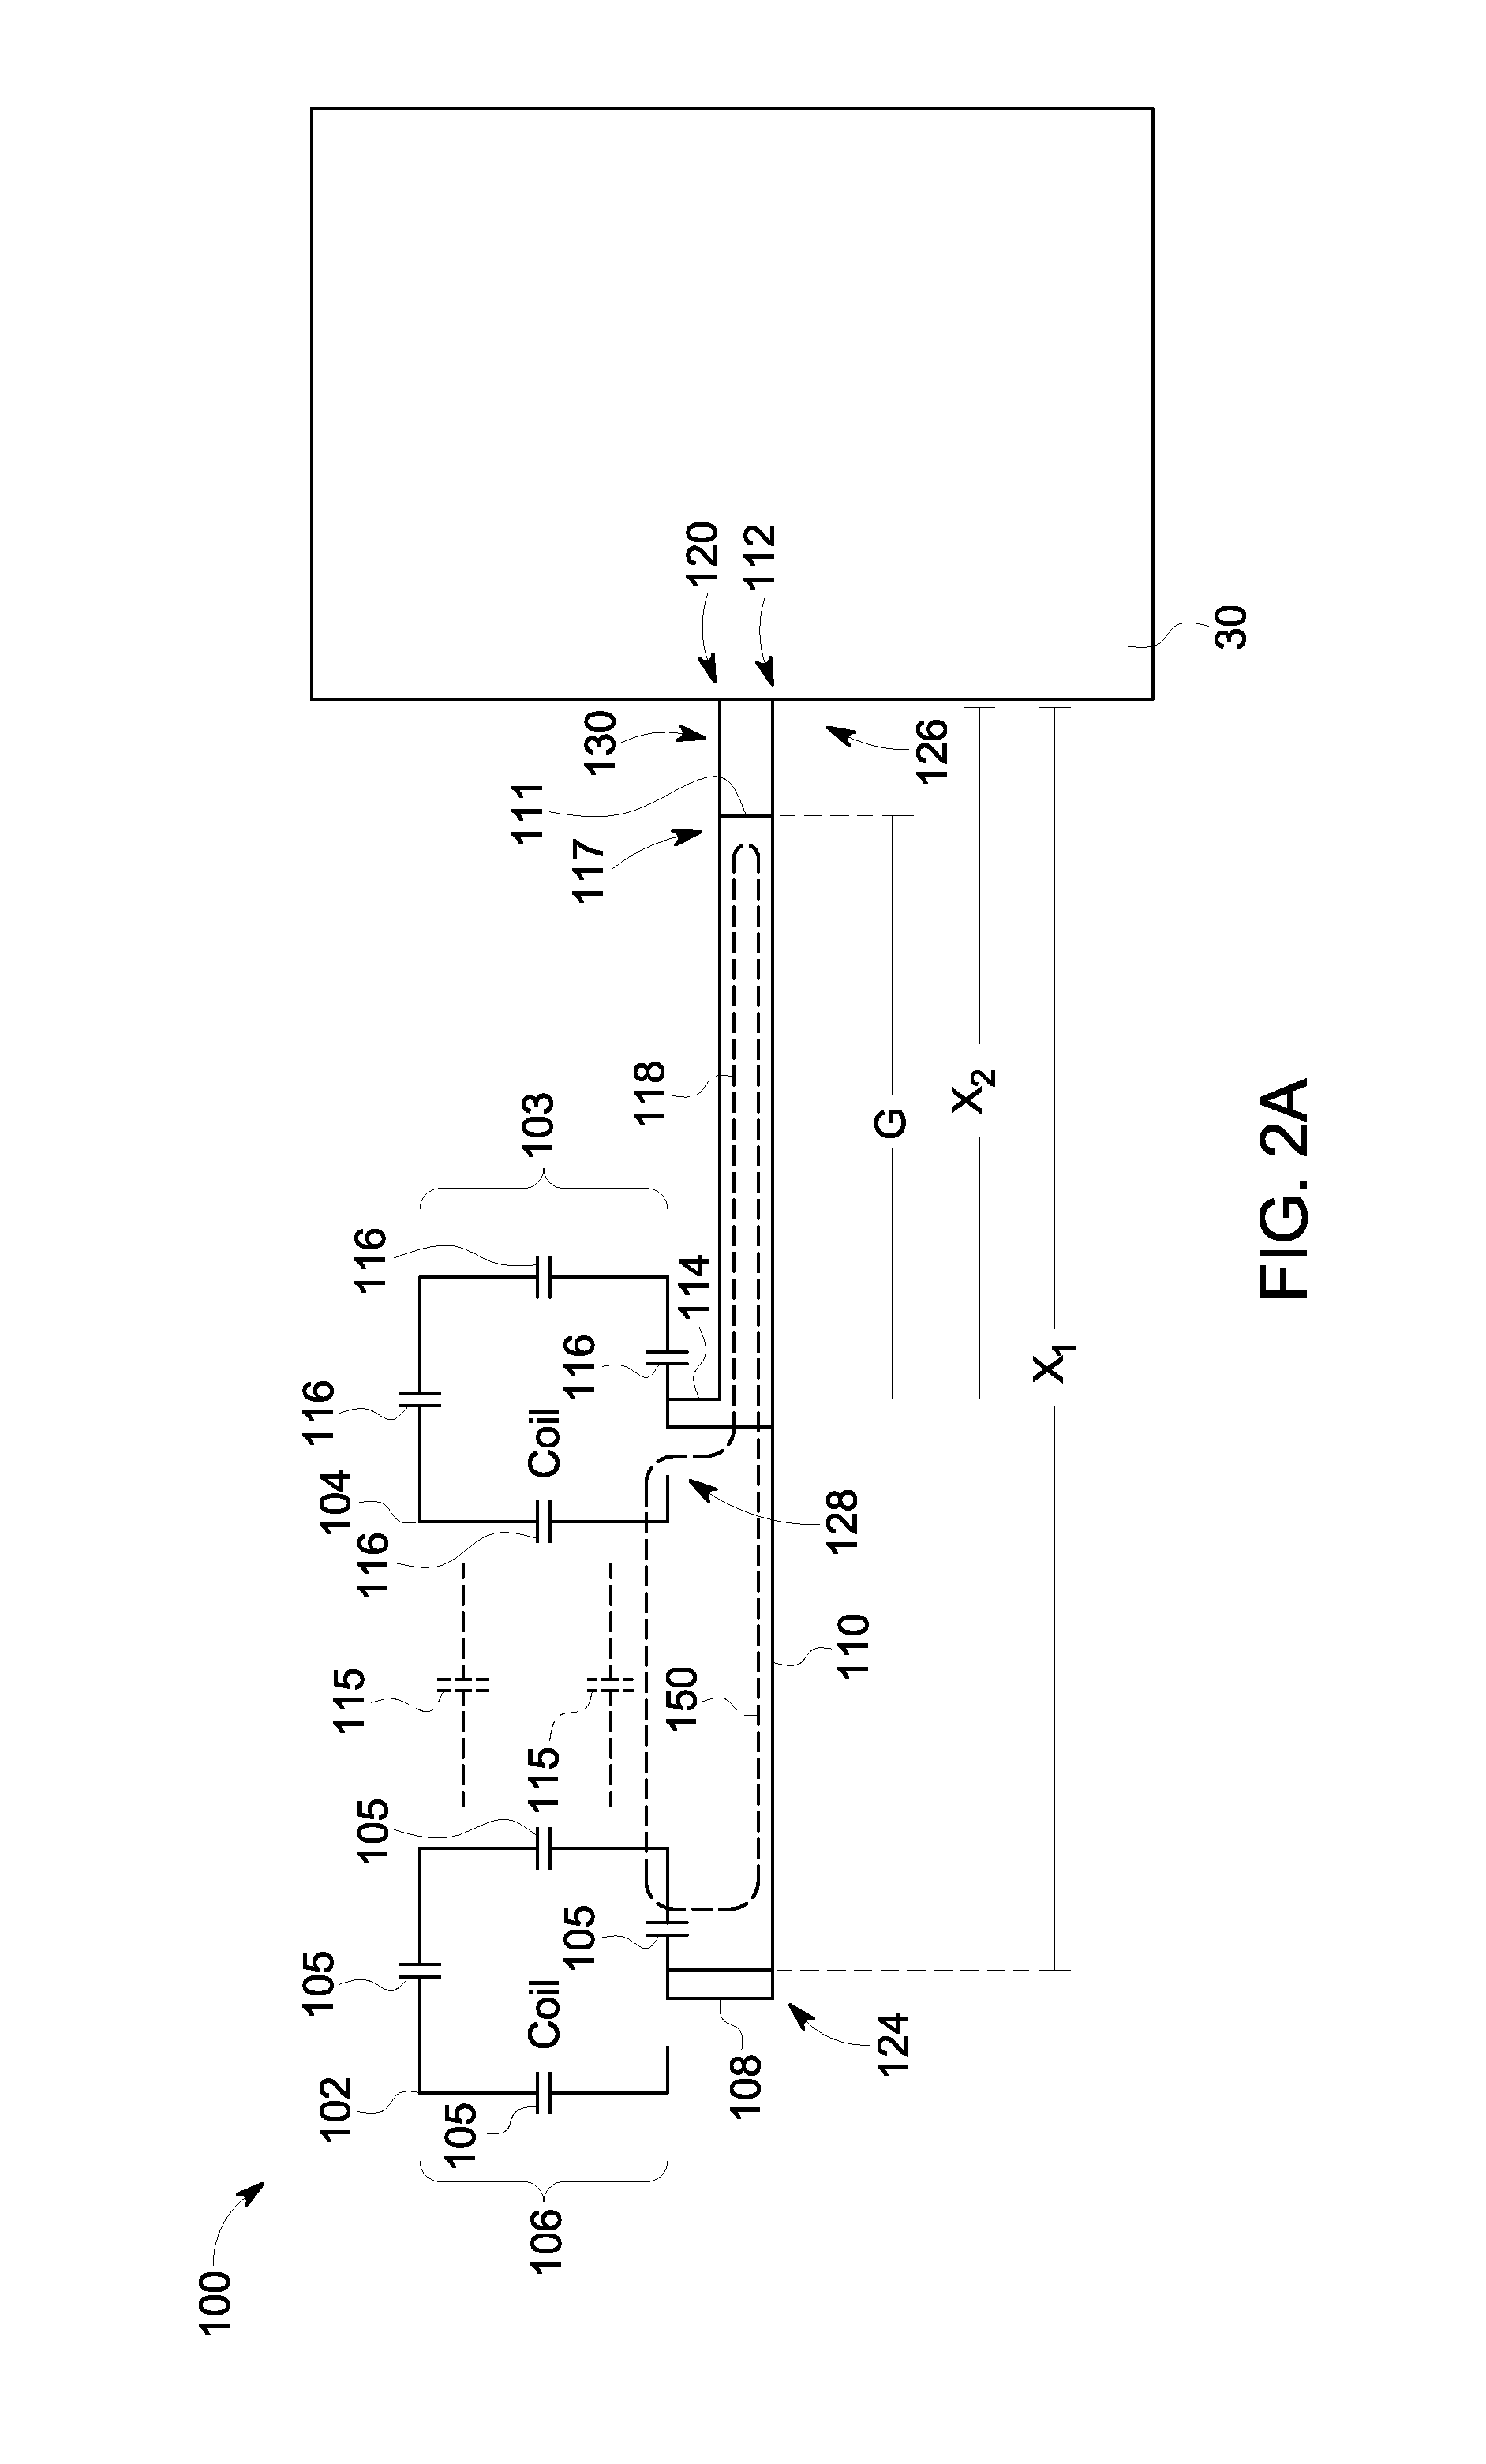 Radio-frequency coil arrays and methods of arranging the same